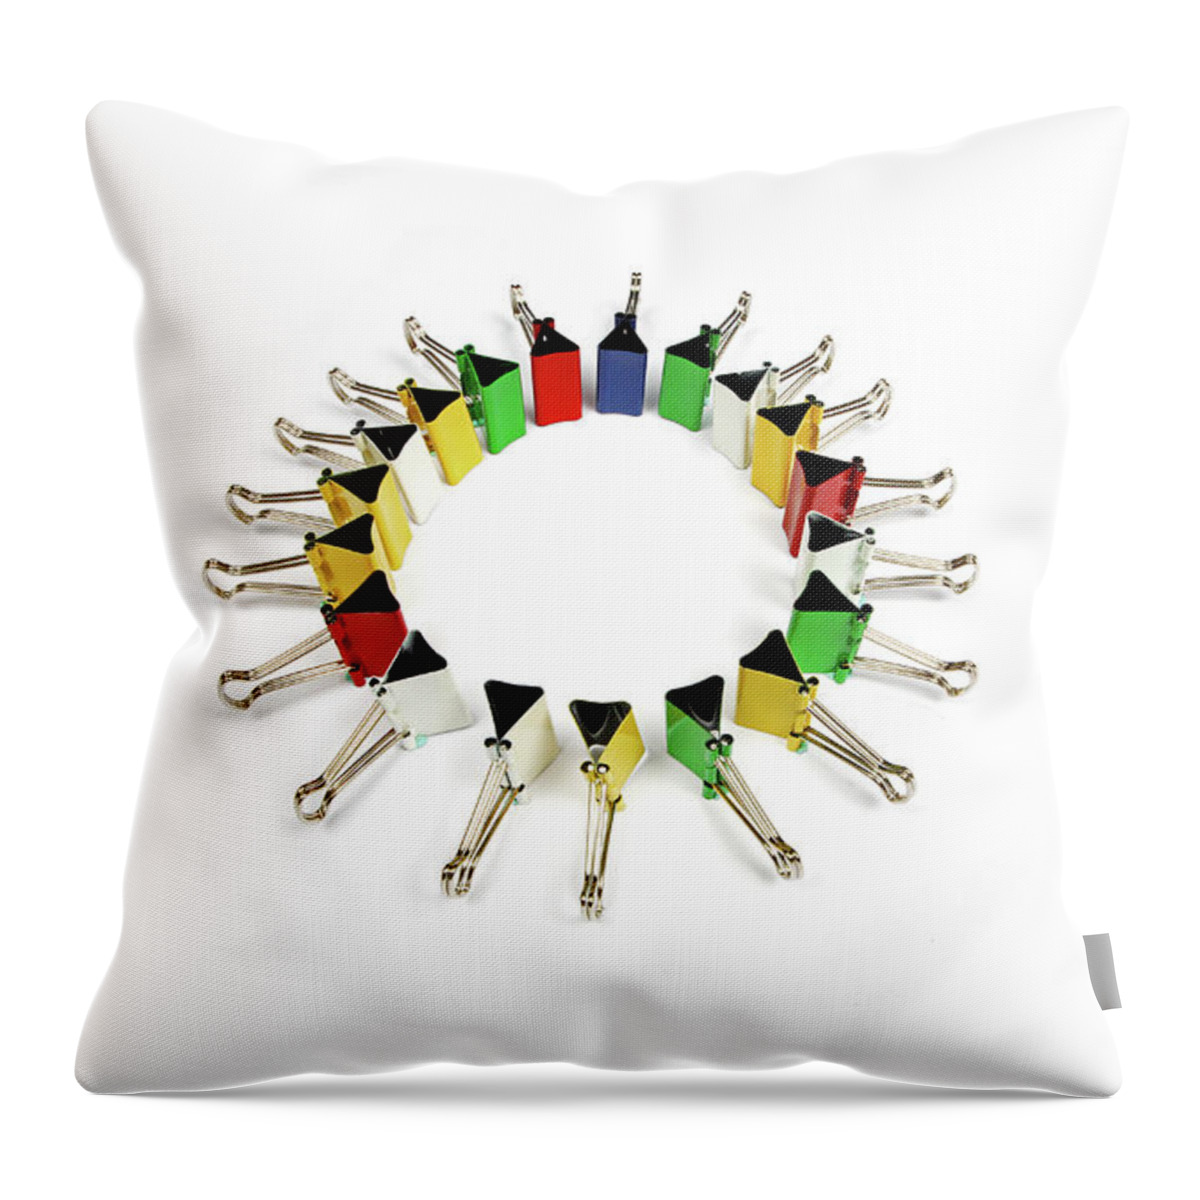 White Background Throw Pillow featuring the photograph Paper Clips, Close Up #1 by Visage